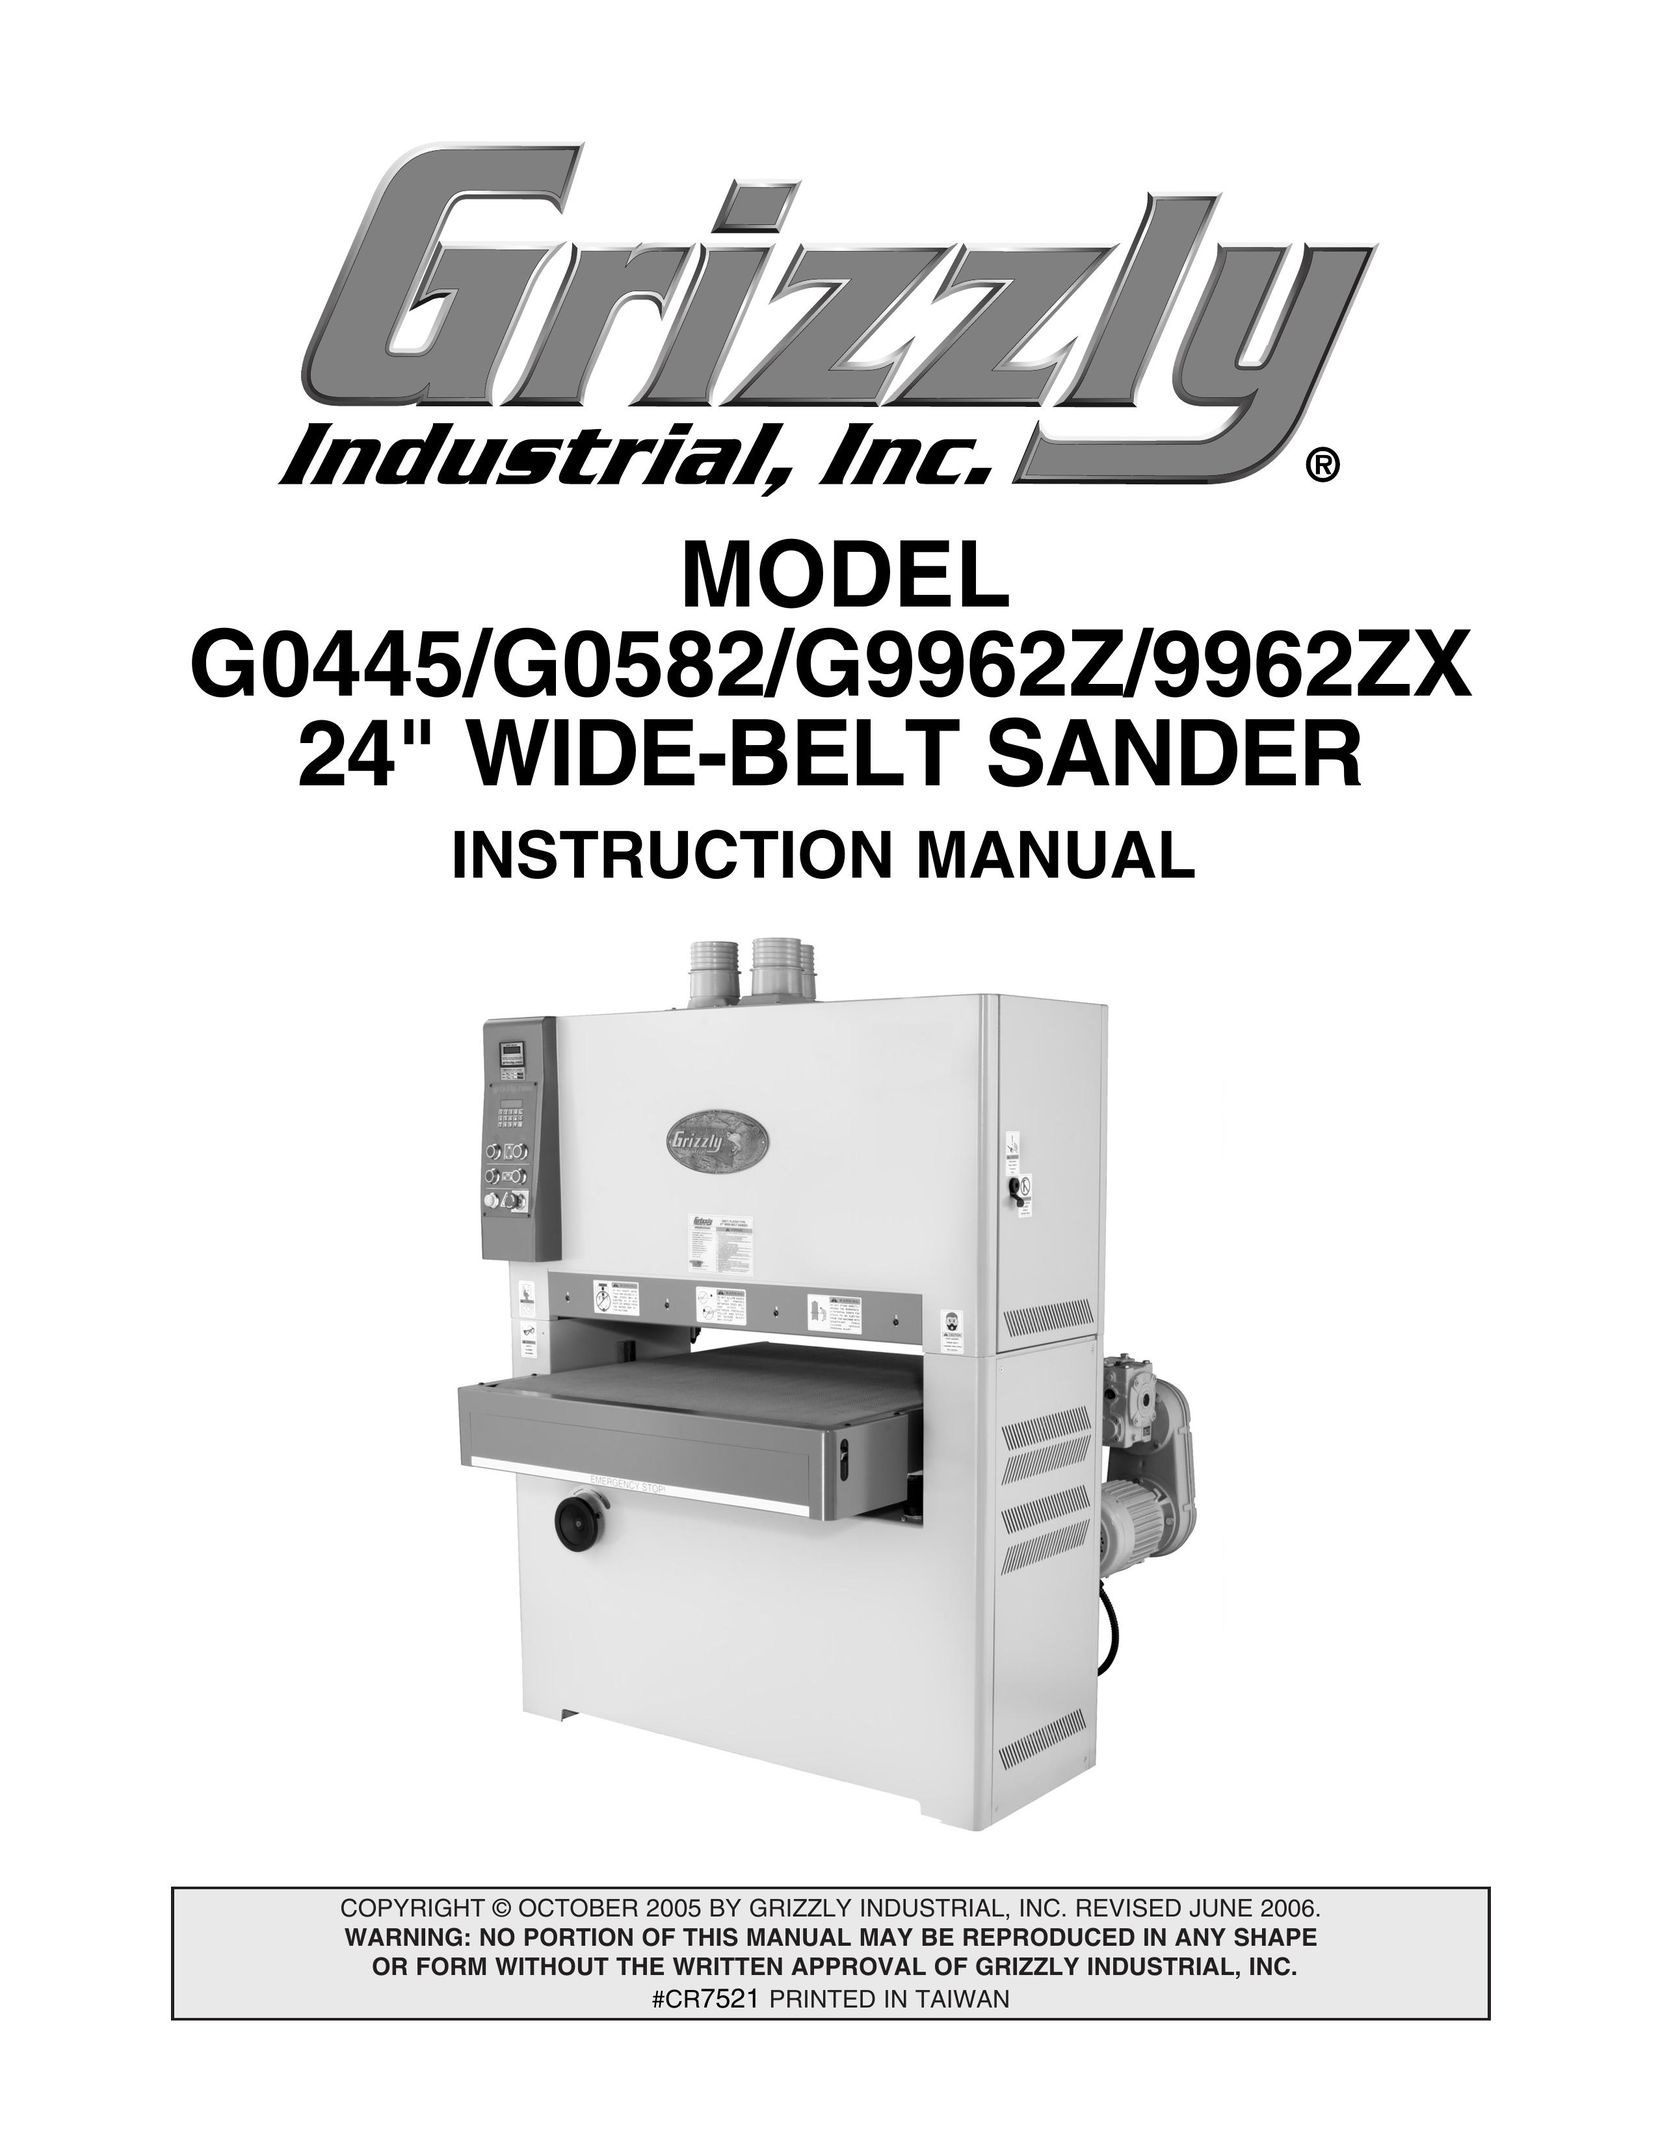 Grizzly G0445 Sander User Manual